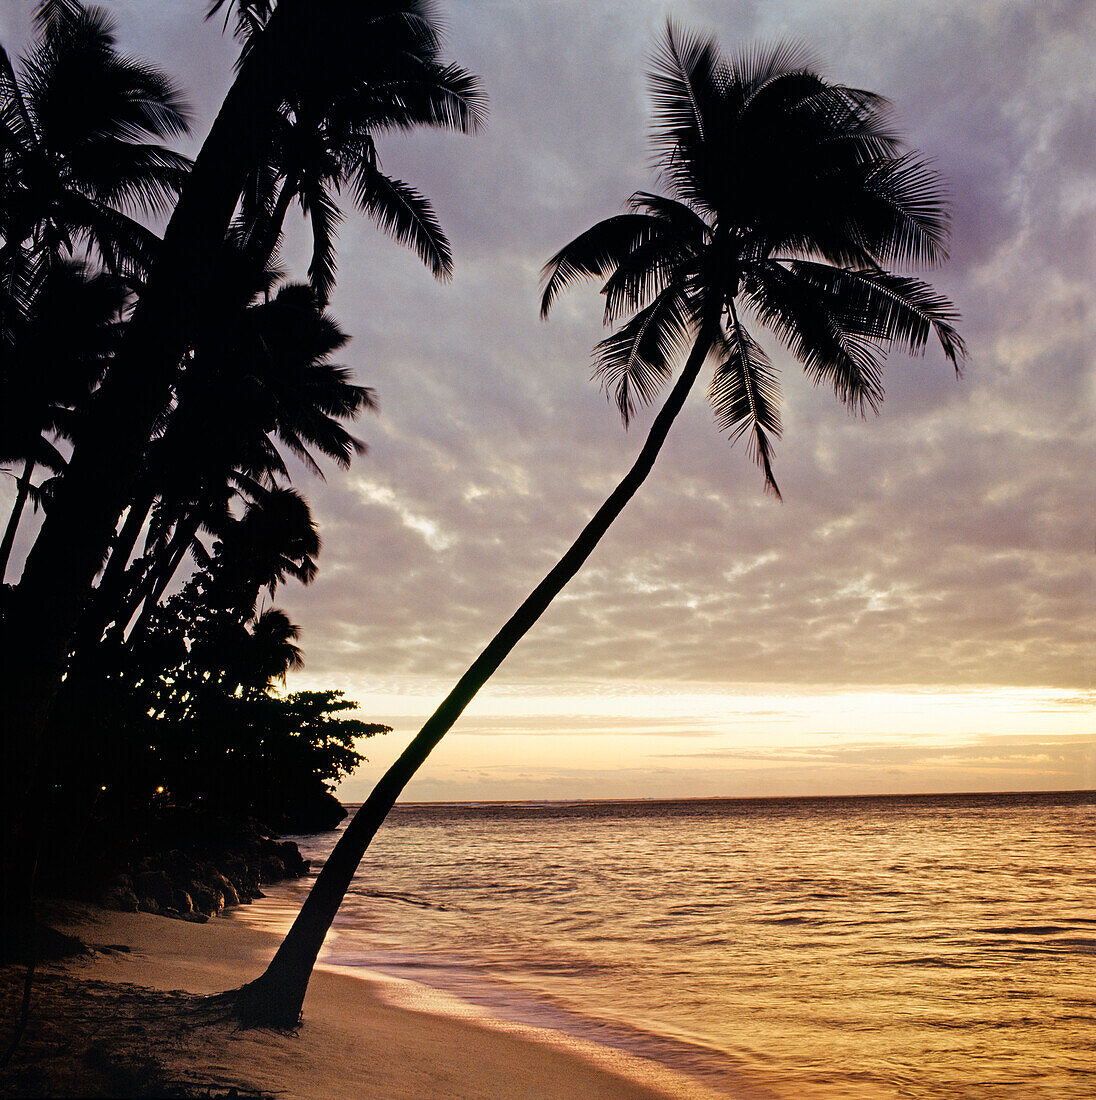 Palm trees on tropical beach leaning over to the sea at sunset